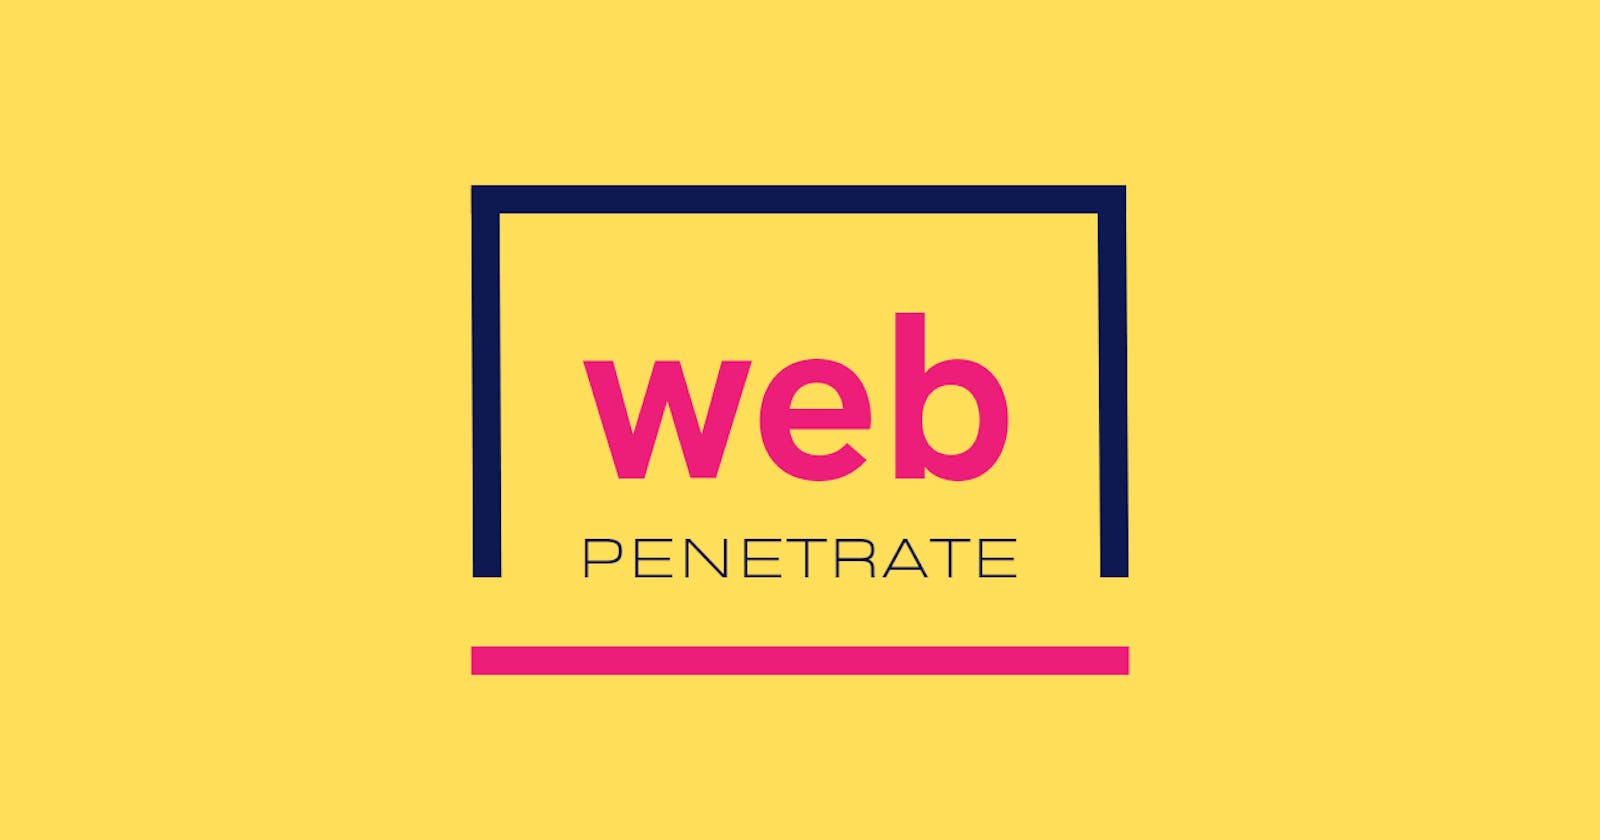 WebPentrate